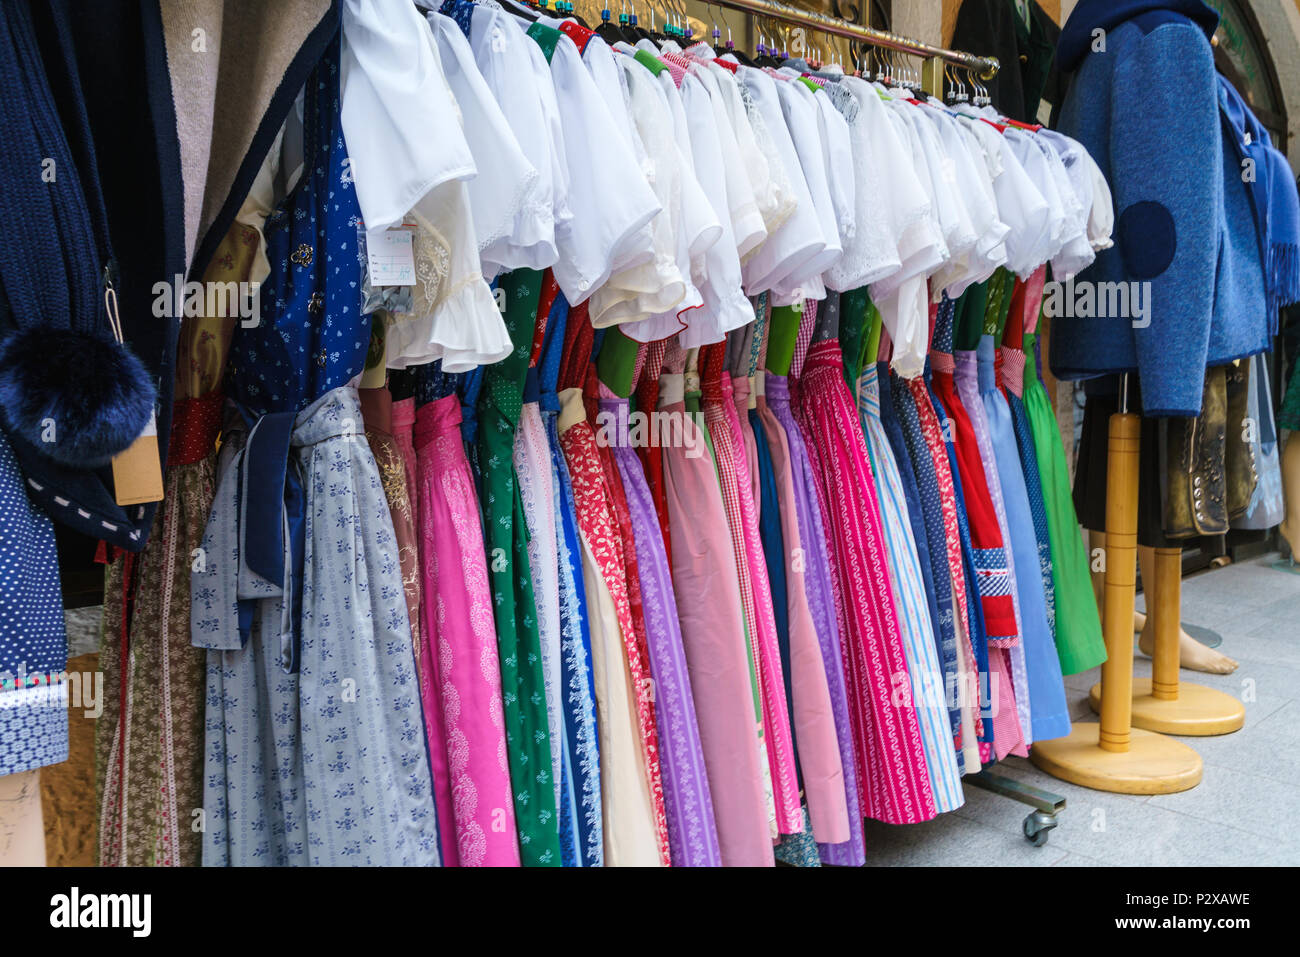 St.Wolfgang, Austria - October 24, 2017: Shop window of traditional Austrian clothes with mannequins Stock Photo